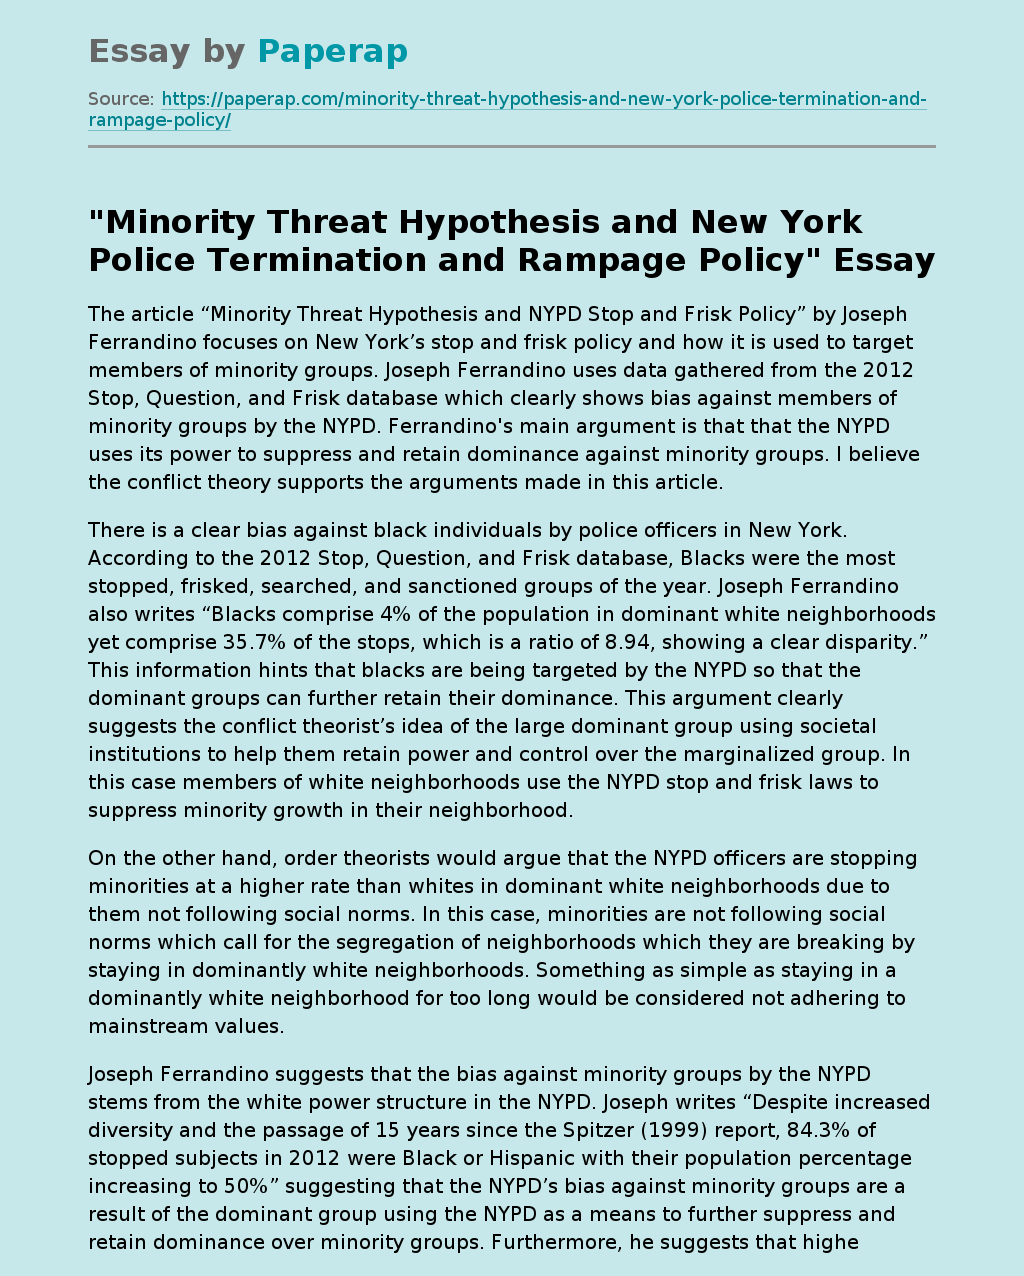 "Minority Threat Hypothesis and New York Police Termination and Rampage Policy"